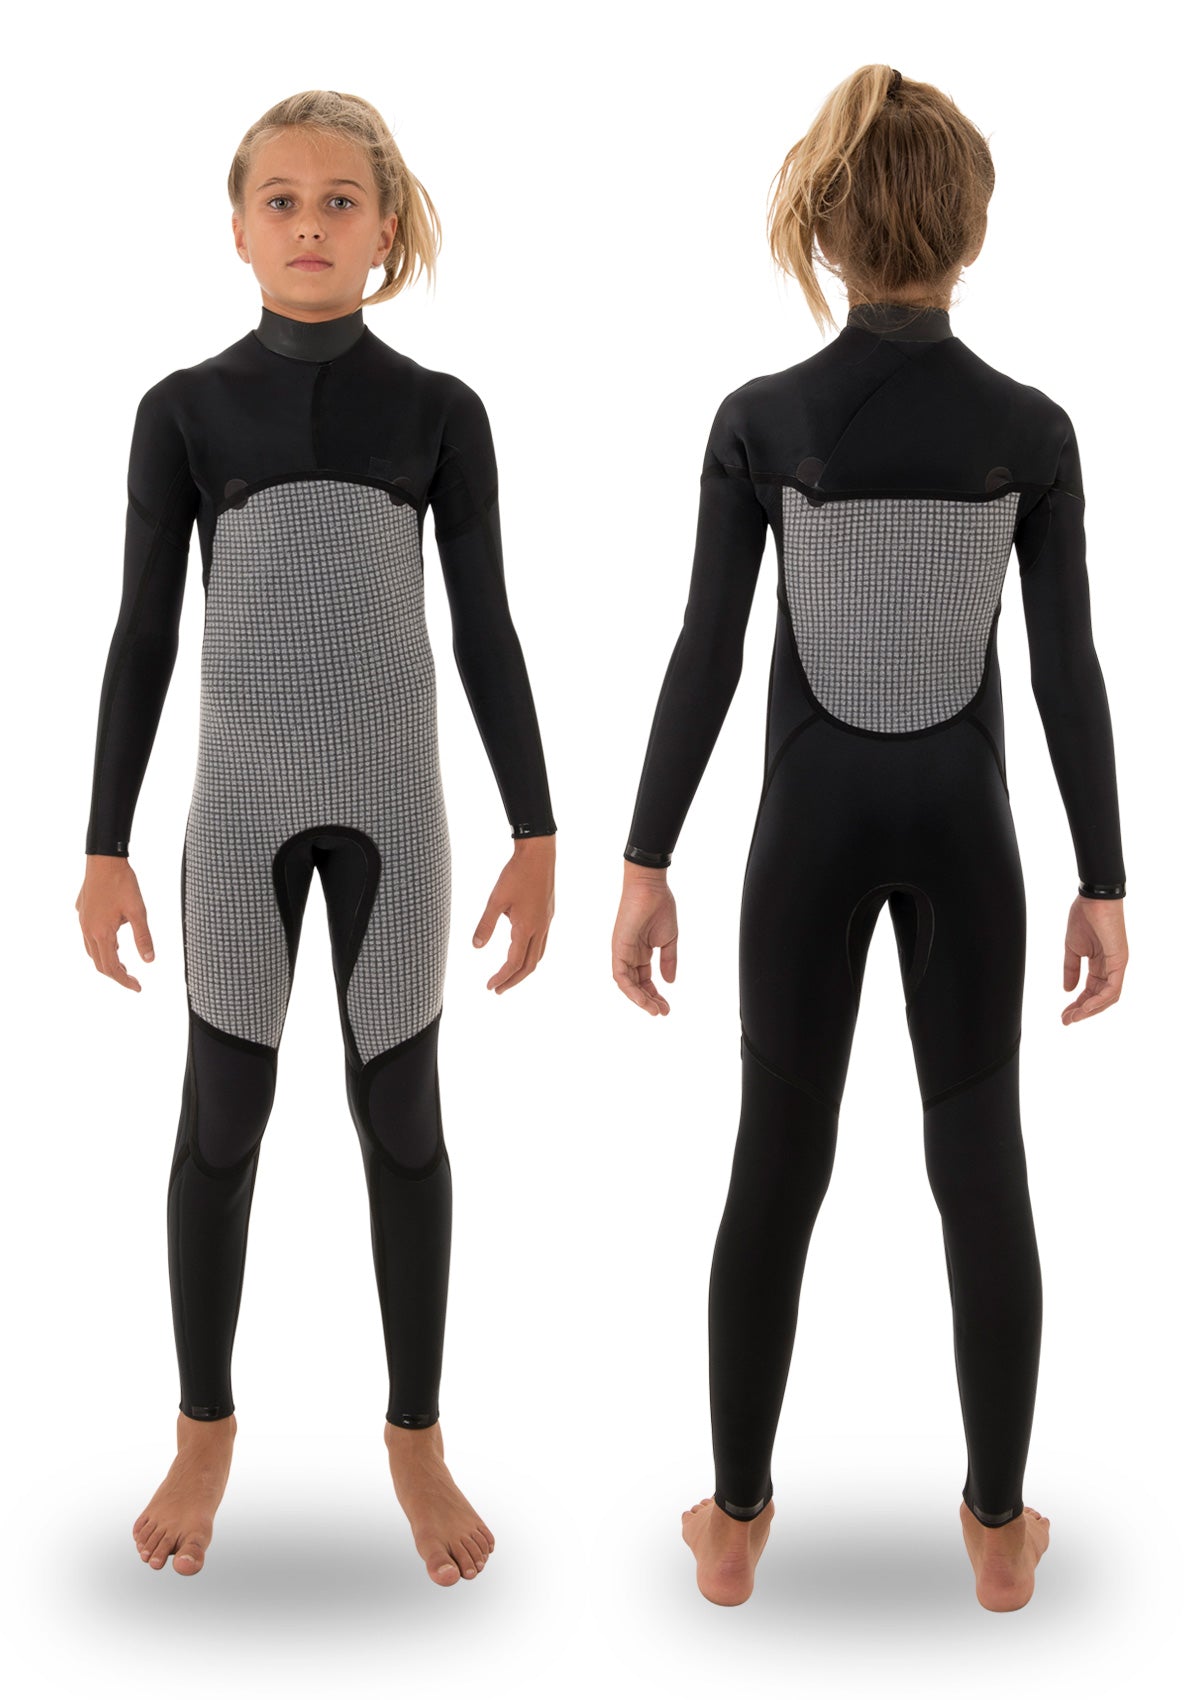 needessentials kids youth 3/ 2 thermal chest zip wetsuit non branded black winter summer